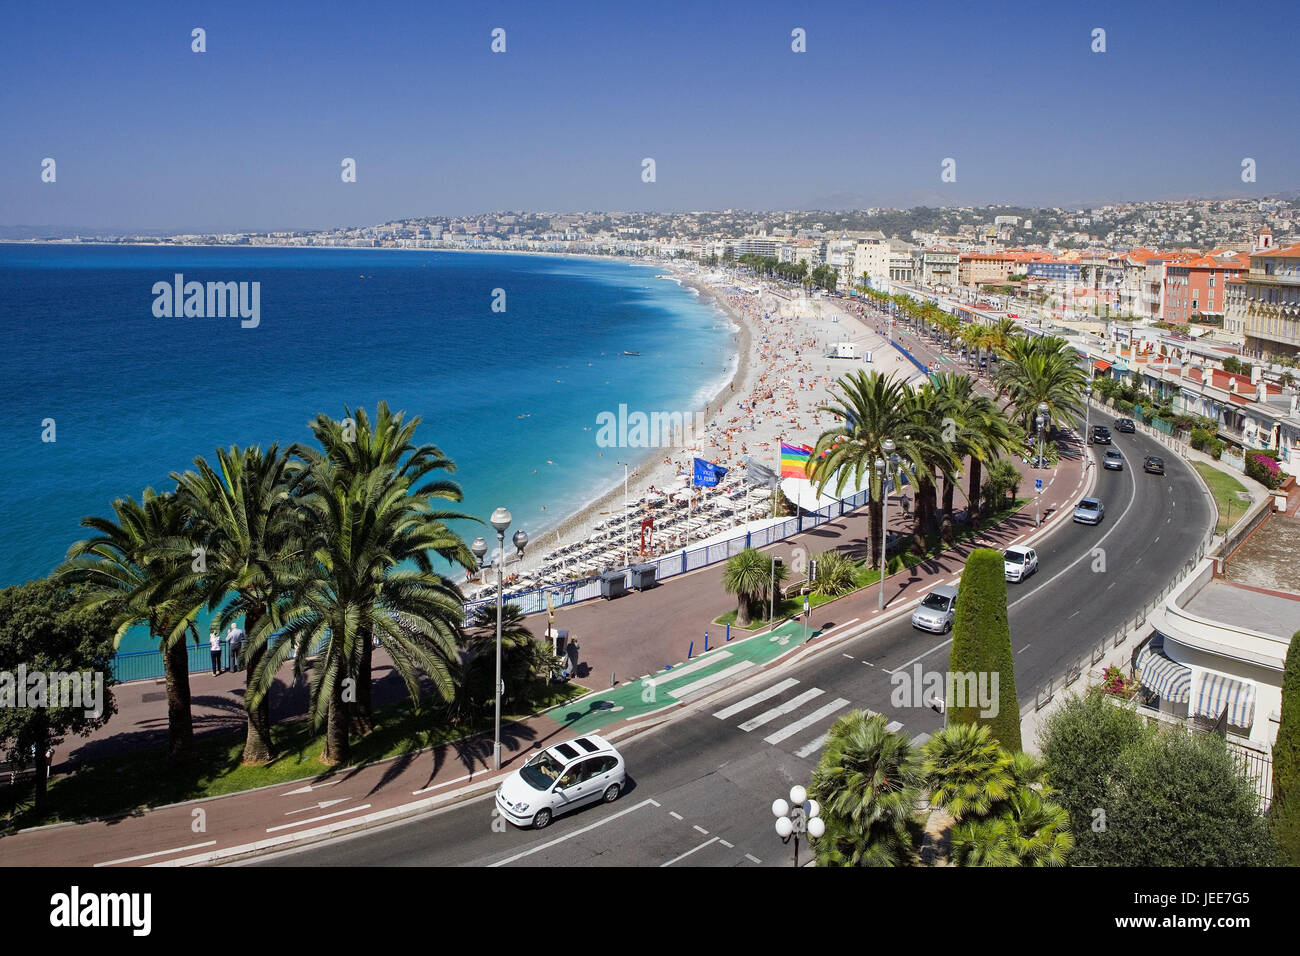 France, Provence, Cote d'Azur, Nice, town view, beach, the South of France, Mediterranean coast, beach, bathers, people, tourists, promenade, seafront, street, traffic, street scene, destination, tourism, Stock Photo